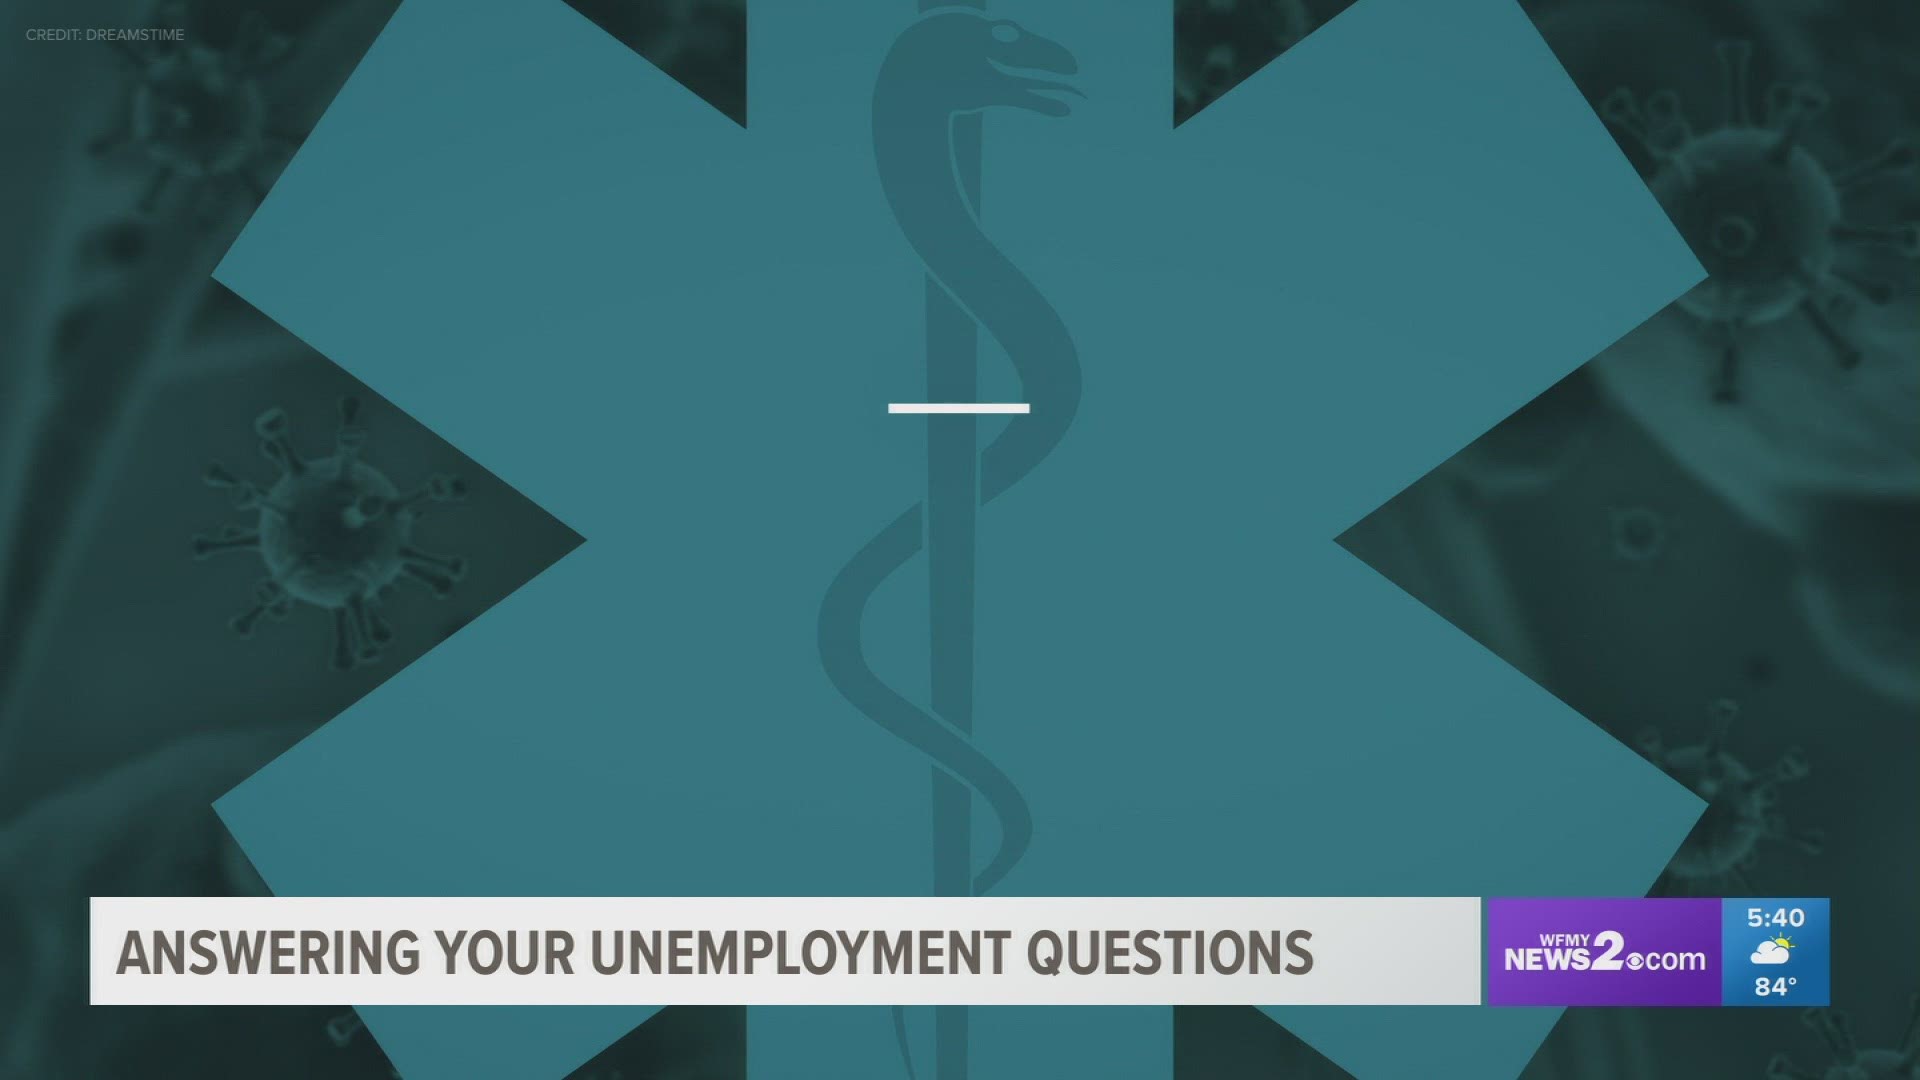 Chris Rivera with Guilford NCWorks answers some of the biggest unemployment questions you still have.